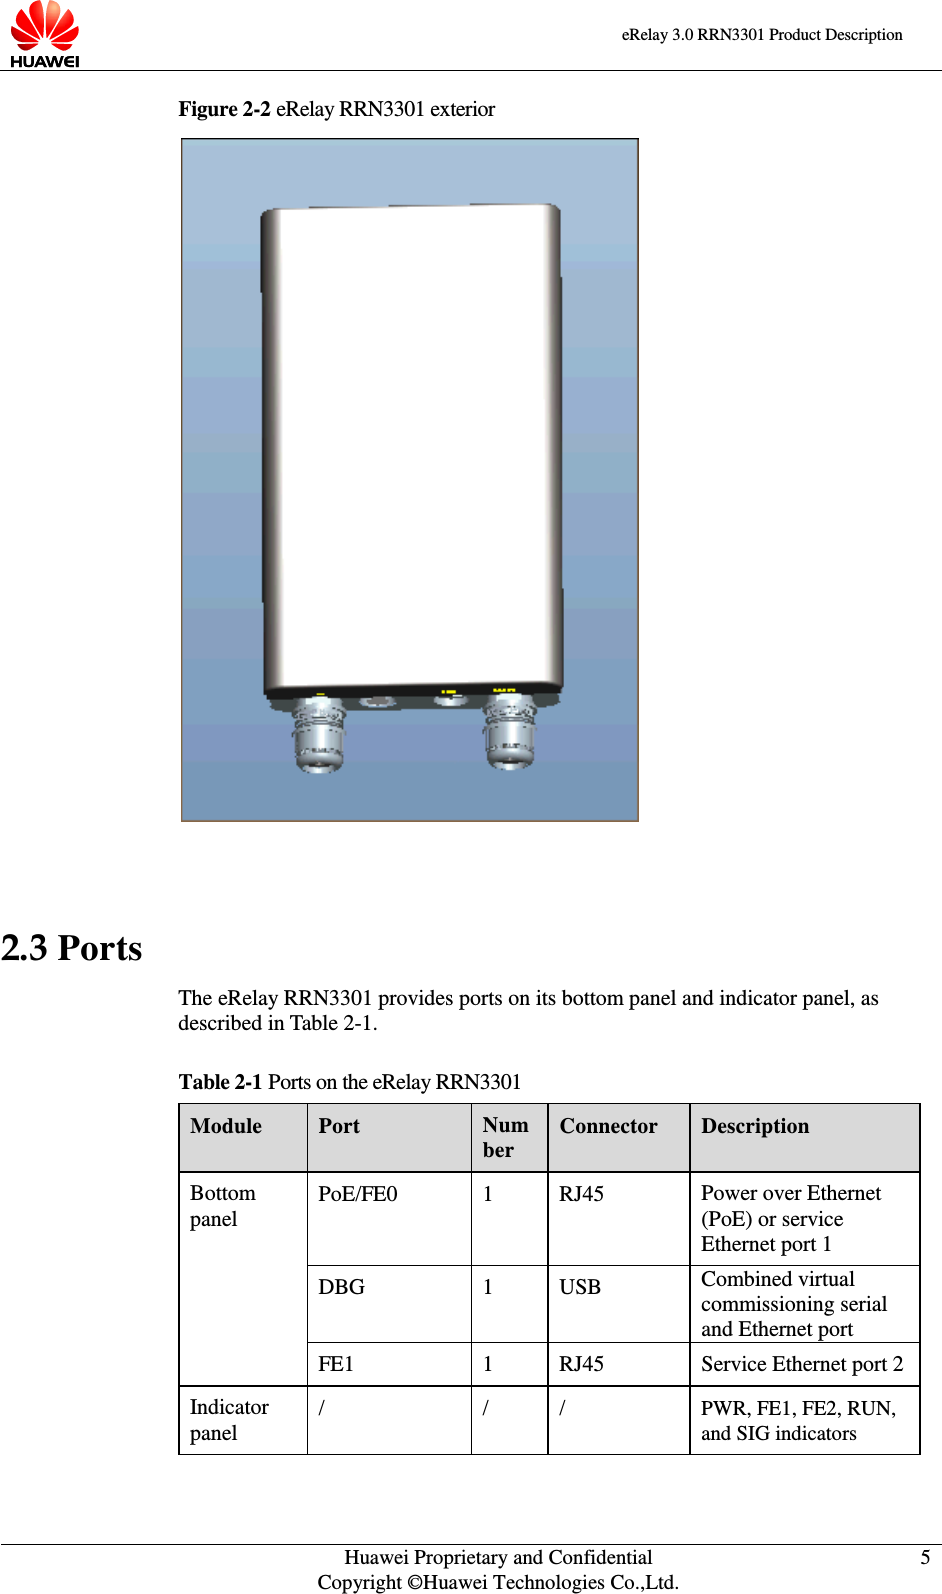    eRelay 3.0 RRN3301 Product Description    Huawei Proprietary and Confidential Copyright ©Huawei Technologies Co.,Ltd. 5  Figure 2-2 eRelay RRN3301 exterior   2.3 Ports The eRelay RRN3301 provides ports on its bottom panel and indicator panel, as described in Table 2-1.   Table 2-1 Ports on the eRelay RRN3301 Module Port Number Connector Description Bottom panel PoE/FE0 1 RJ45 Power over Ethernet (PoE) or service Ethernet port 1 DBG 1 USB Combined virtual commissioning serial and Ethernet port FE1 1 RJ45 Service Ethernet port 2 Indicator panel / / / PWR, FE1, FE2, RUN, and SIG indicators  